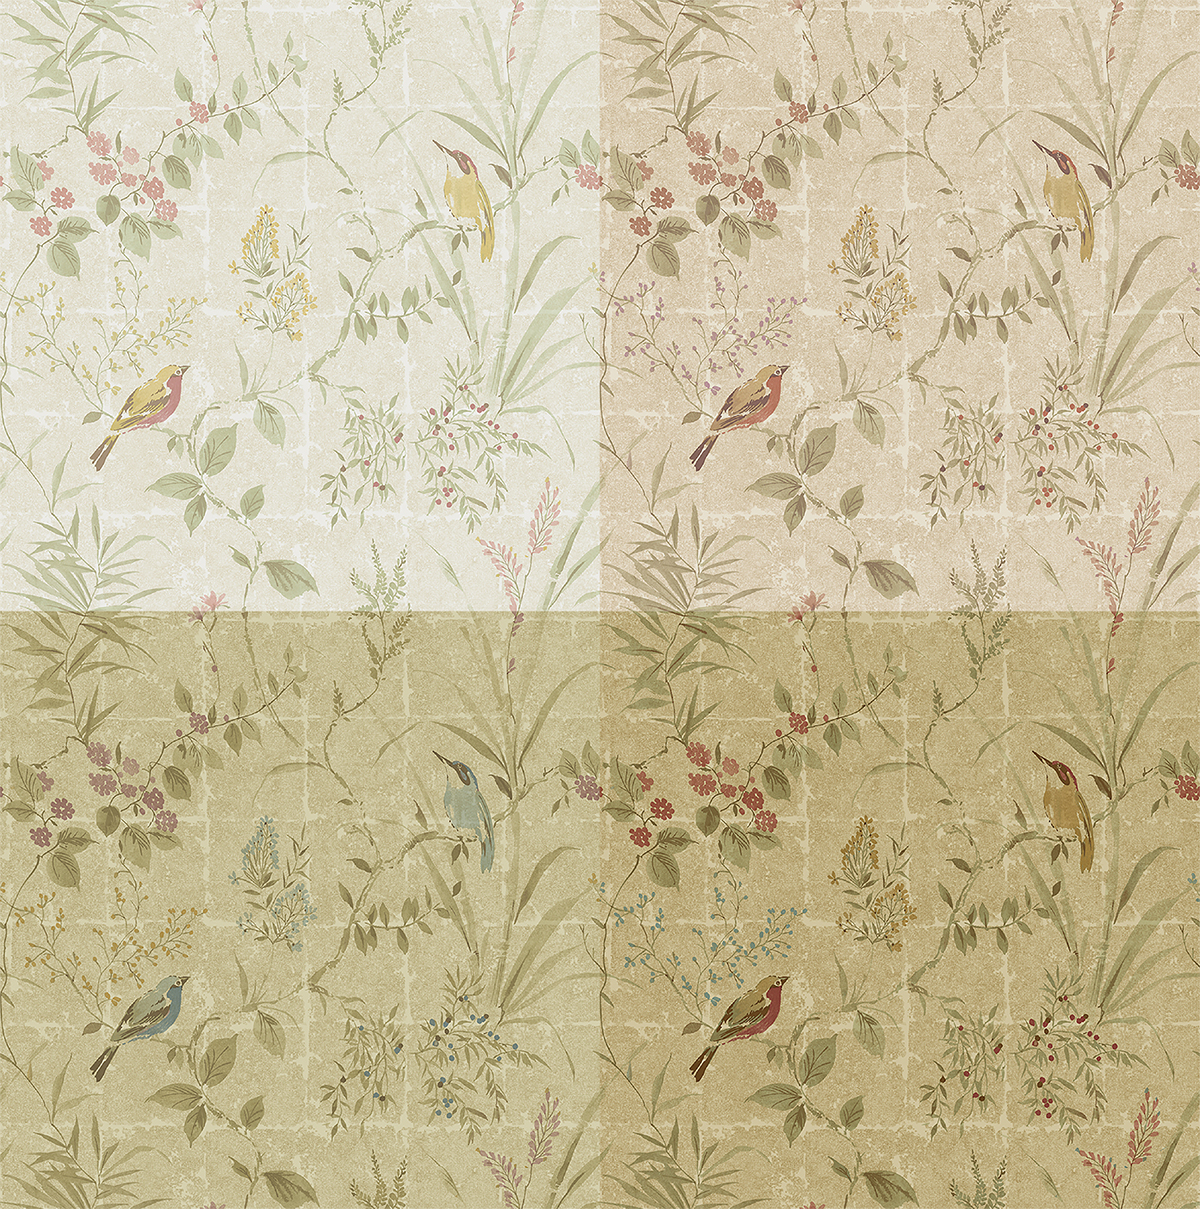 Lovely Collection Of Chinoiserie Wallpaper Designs In Varying Hues